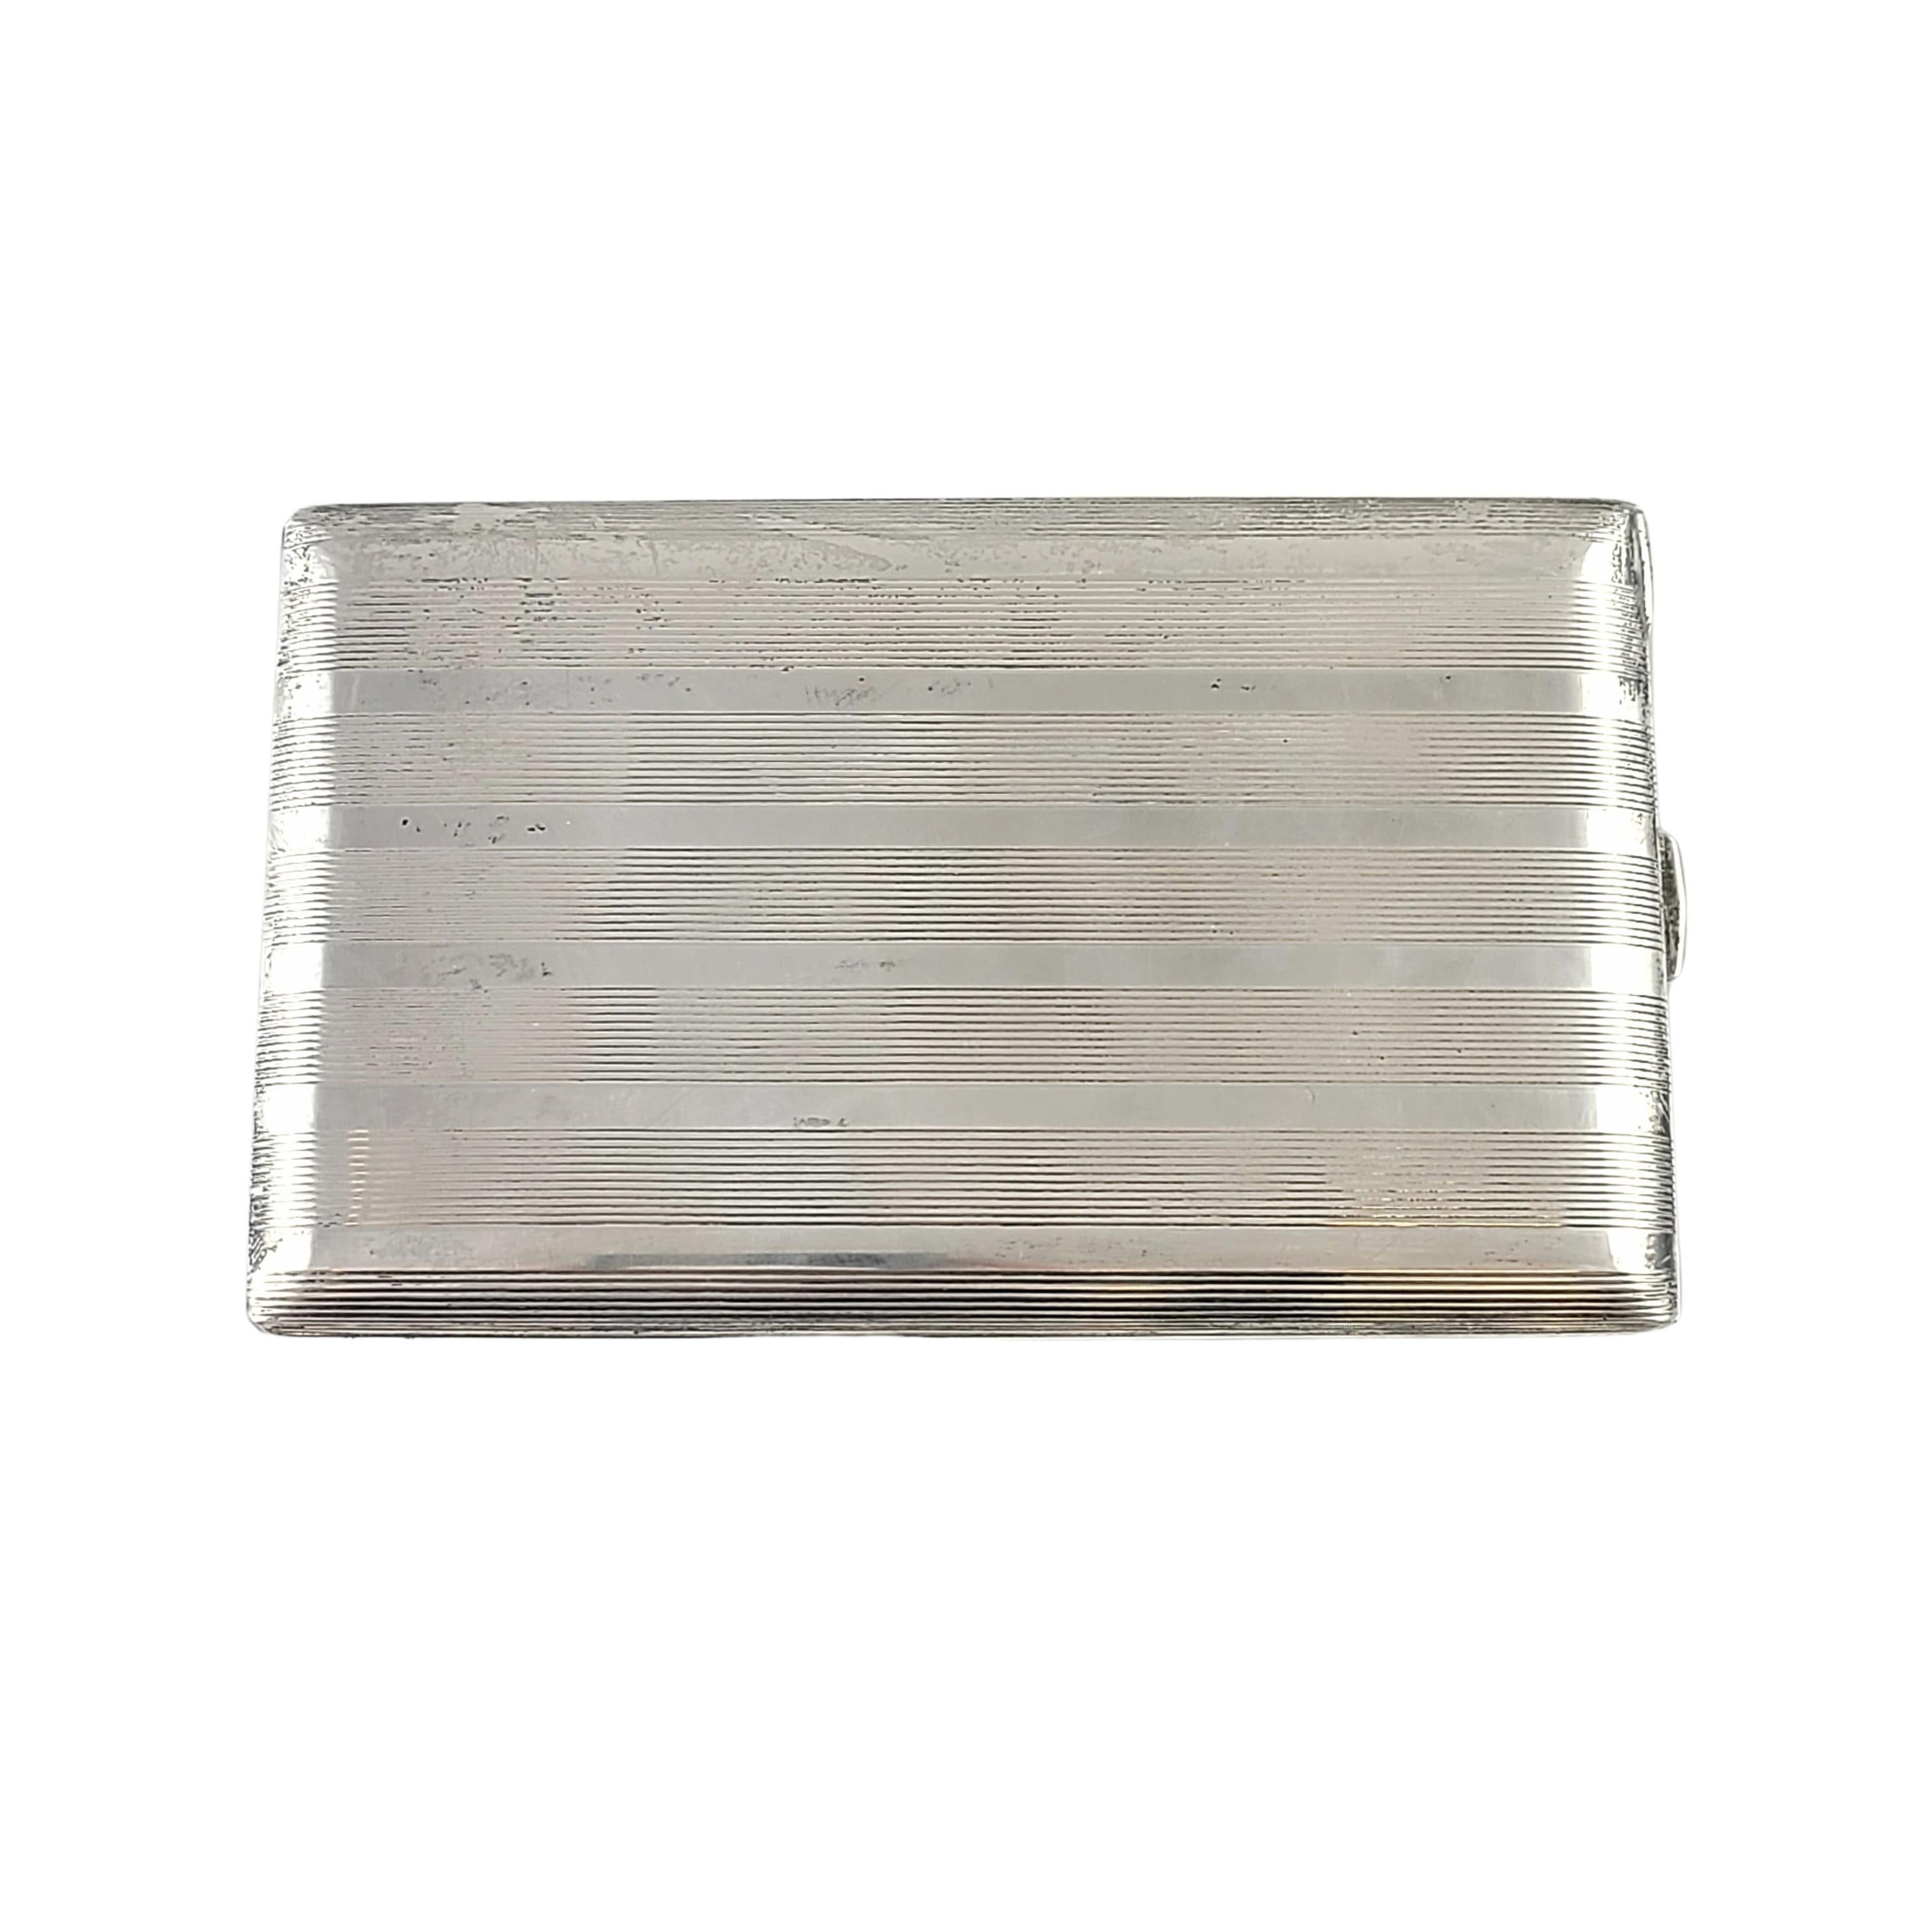 Sterling silver cigarette case by Black Starr & Gorham.

Engraved on the inside lid: FJP MAY 1943 FROM E. AND A. DOUGLAS

Black Starr & Gorham was a prominent manufacturer of silverware from 1940-1962. This piece features a banded etched striped